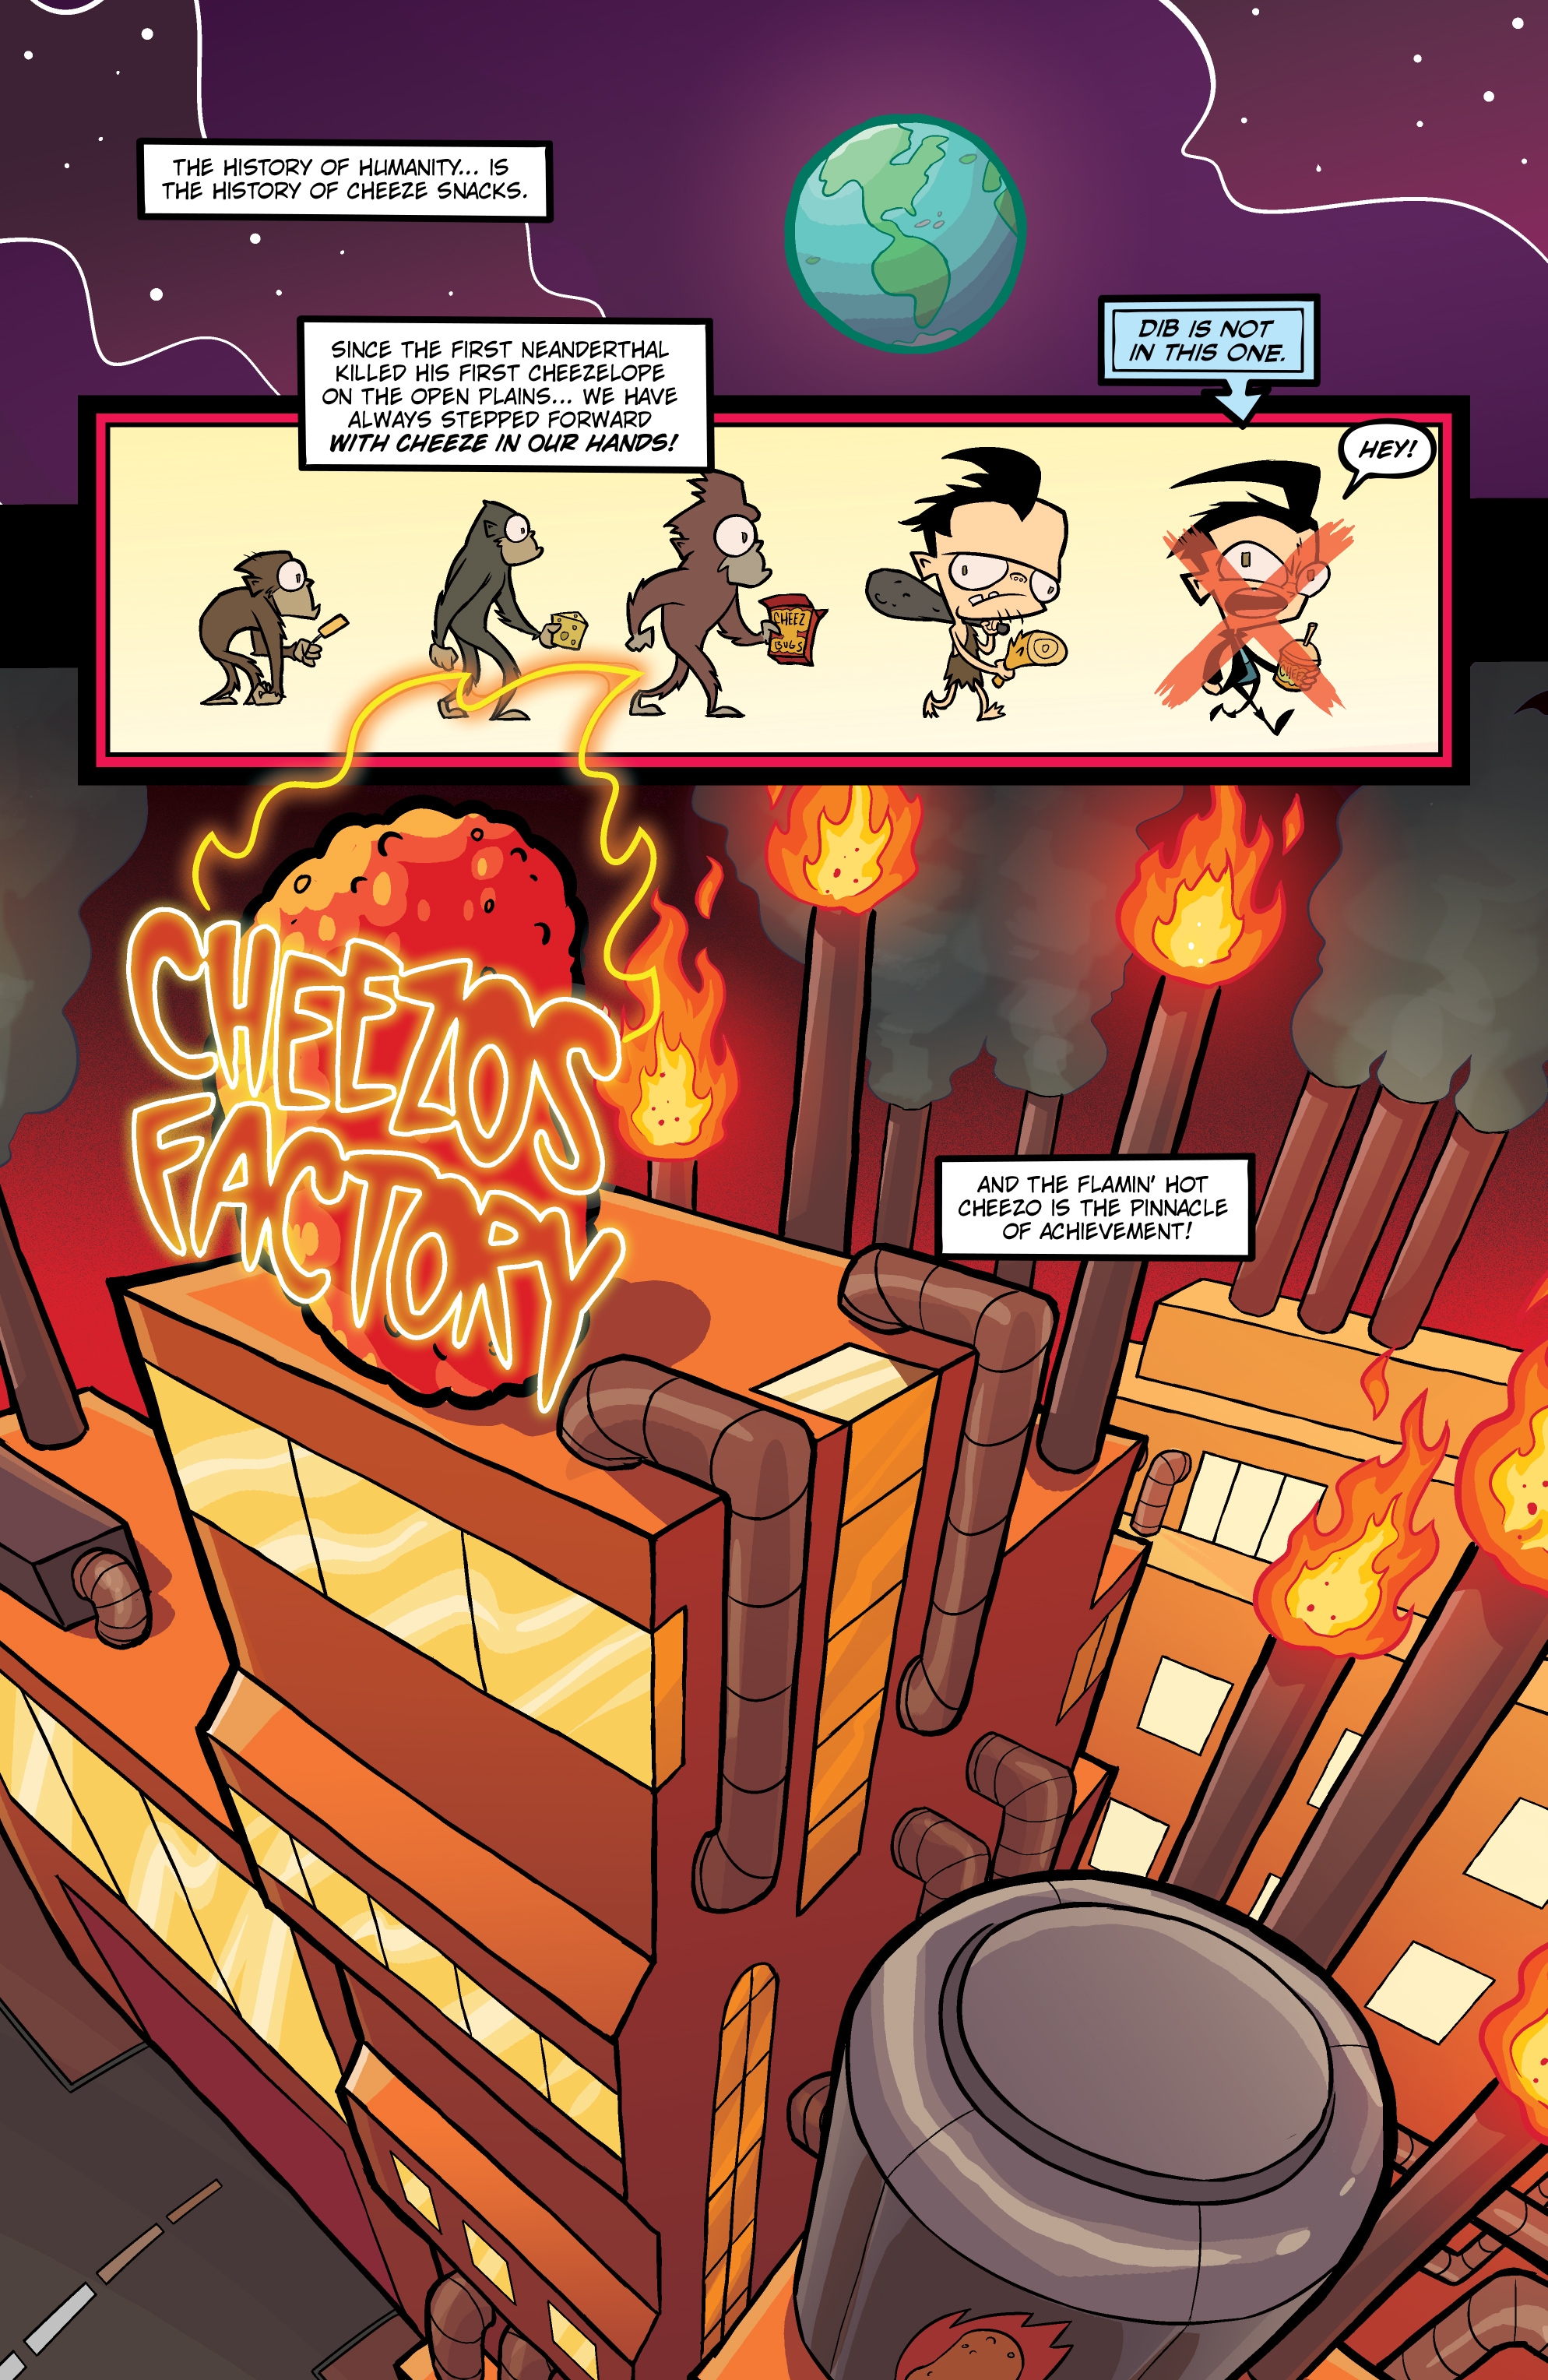 Invader Zim (2015-): Chapter 22 - Page 3